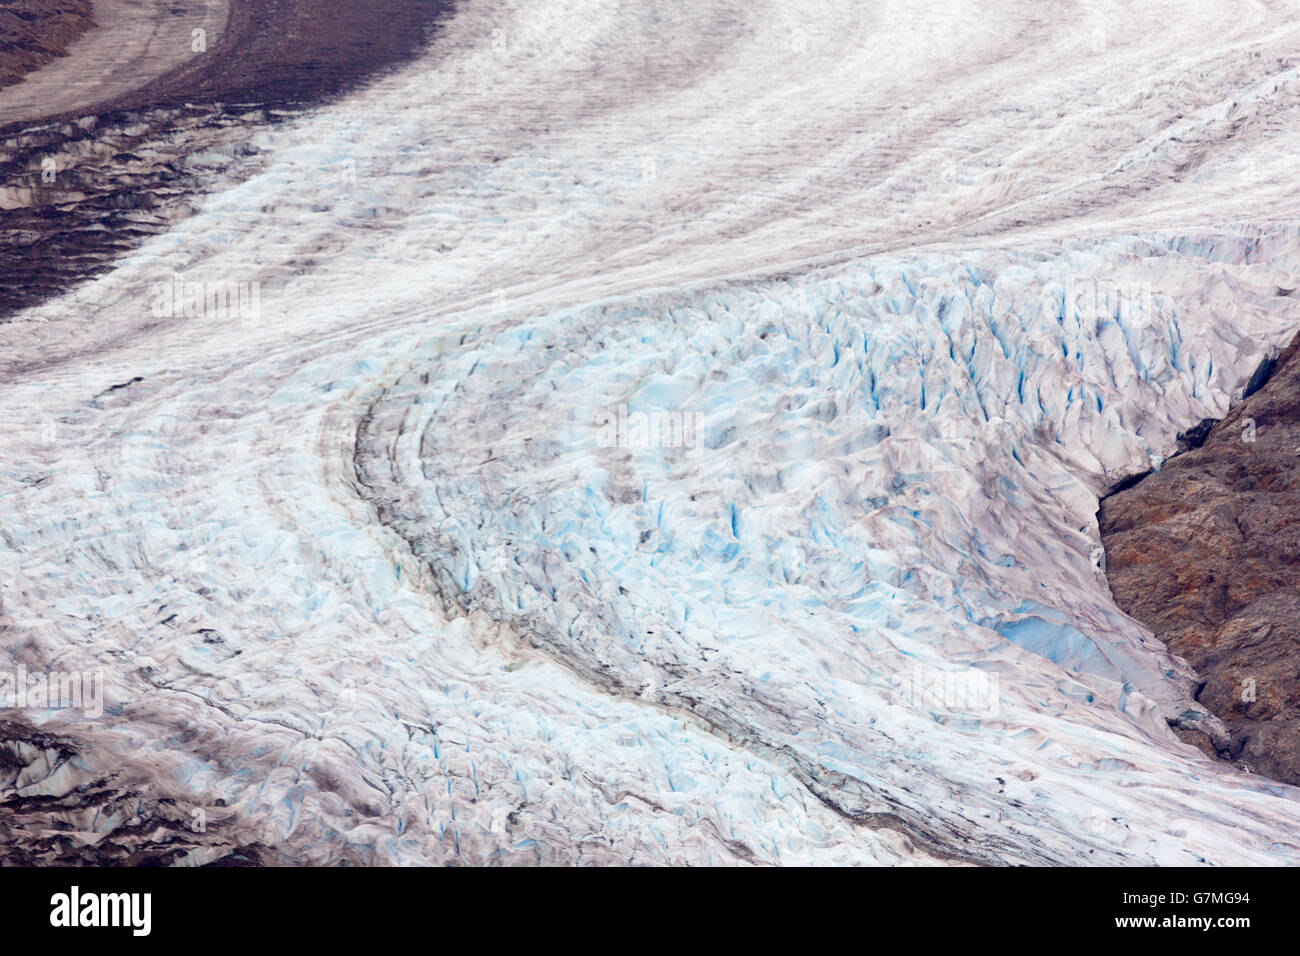 Curving, receding view of Salmon Glacier ice and its exposed rocky ground. Stock Photo